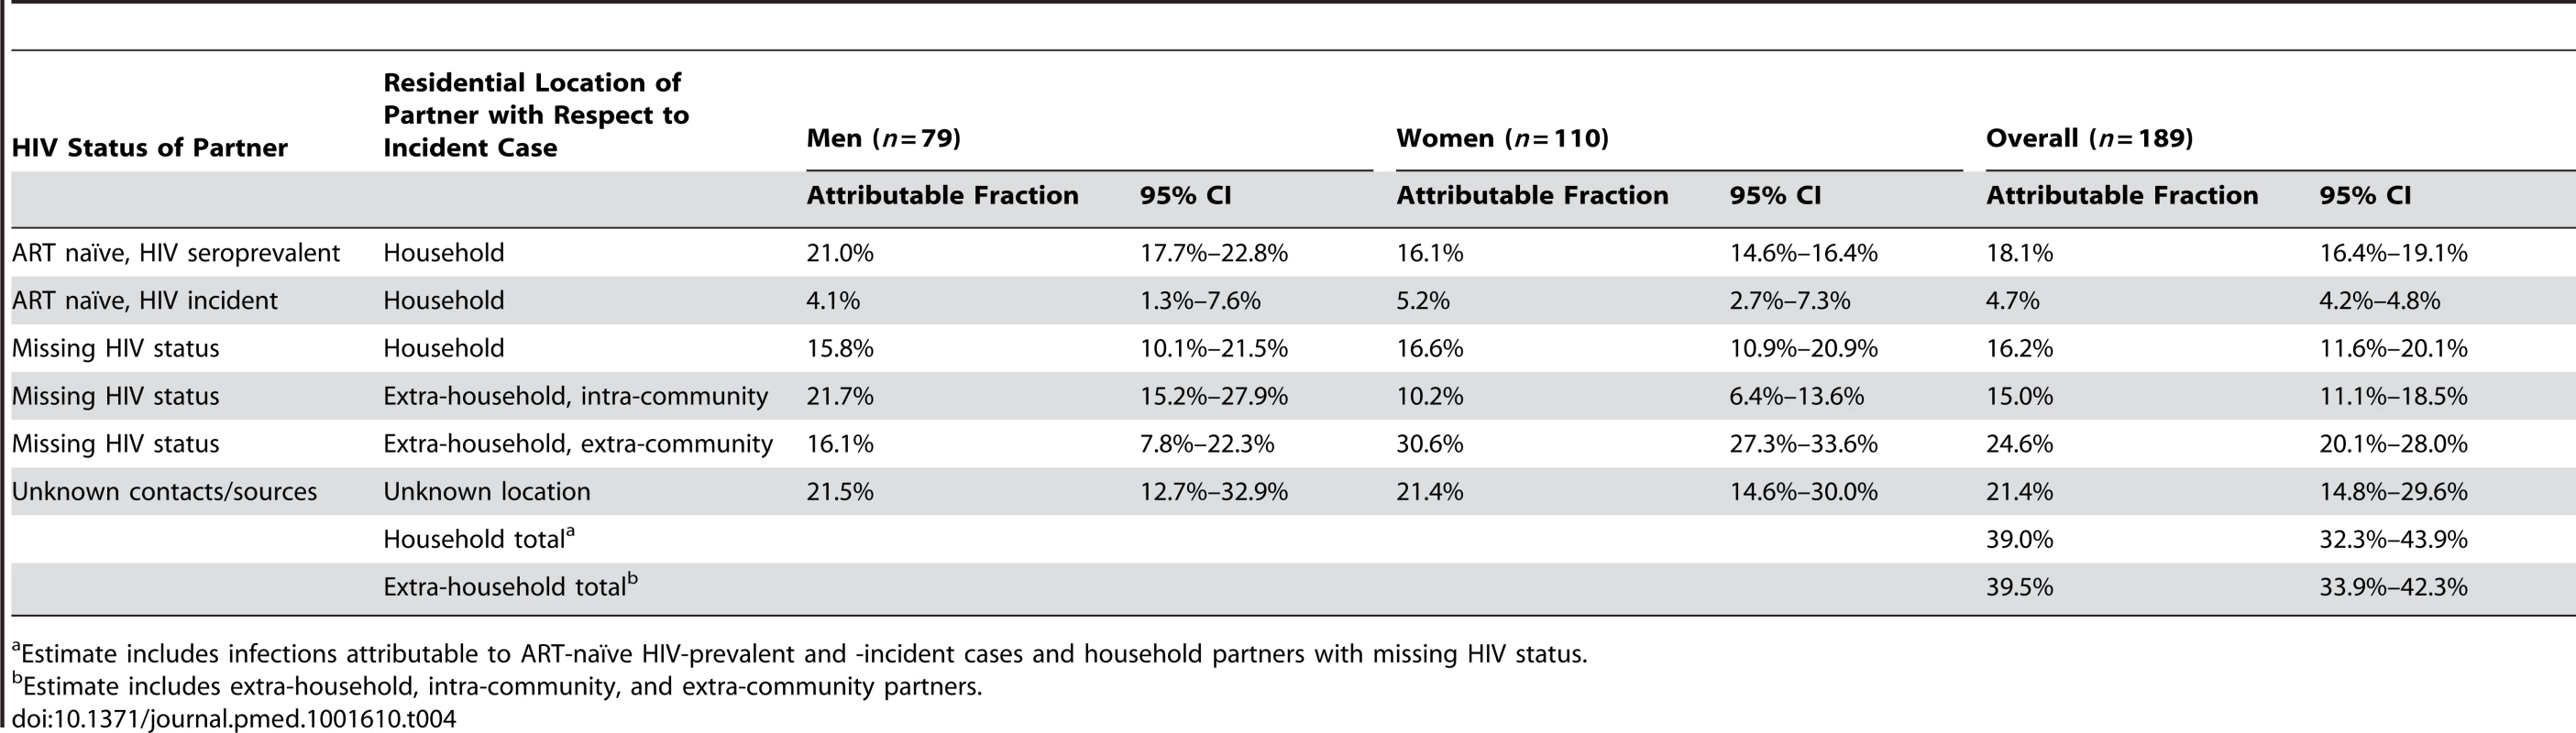 Attributable HIV transmissions by geographic location of sexual partner and gender of newly infected participant (estimated from egocentric transmission model).